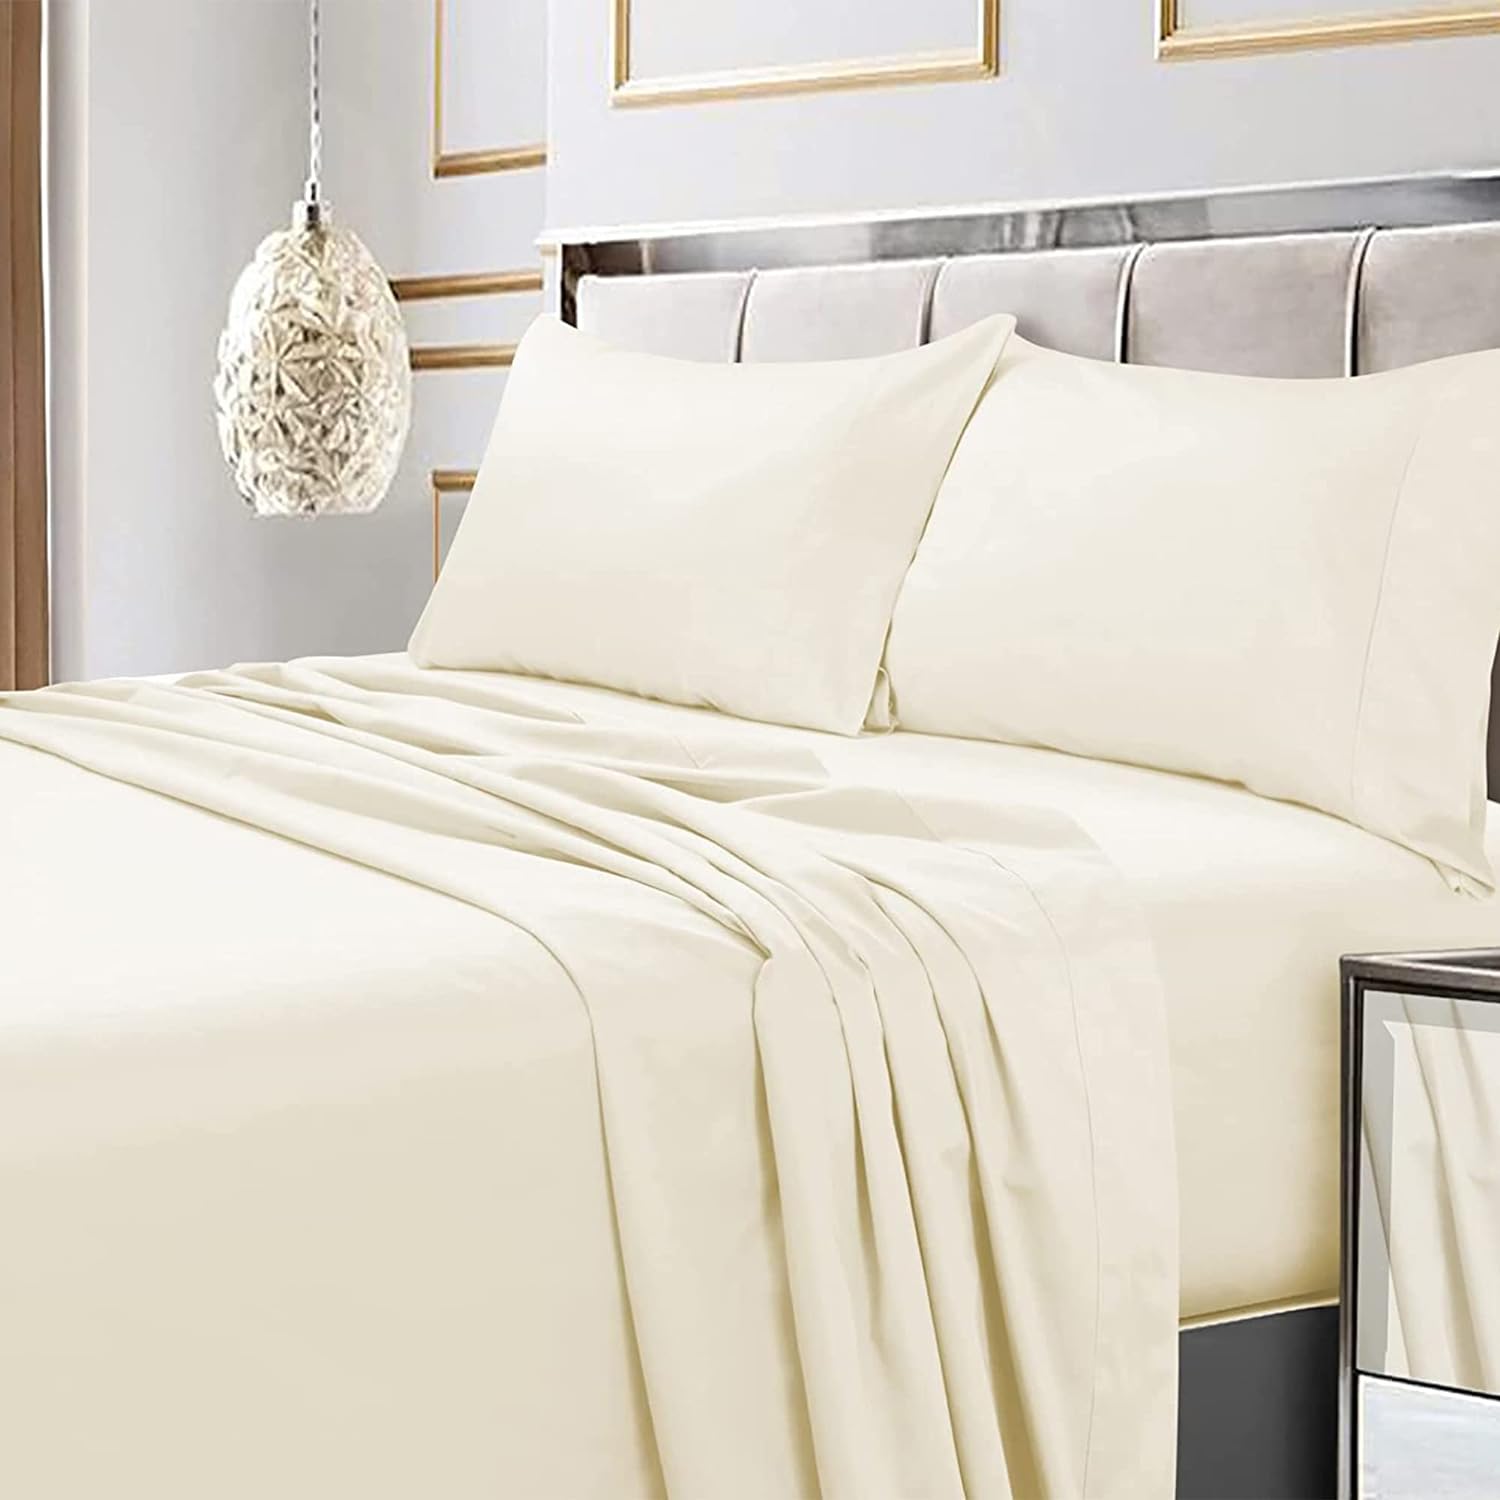 Tribeca Living Soft Egyptian Cotton Sateen Solid Sheets and Pillowcase Set, Deep Pocket, 600 Thread Count, 6-Piece Luxury Bedding, Cal King, Ivory